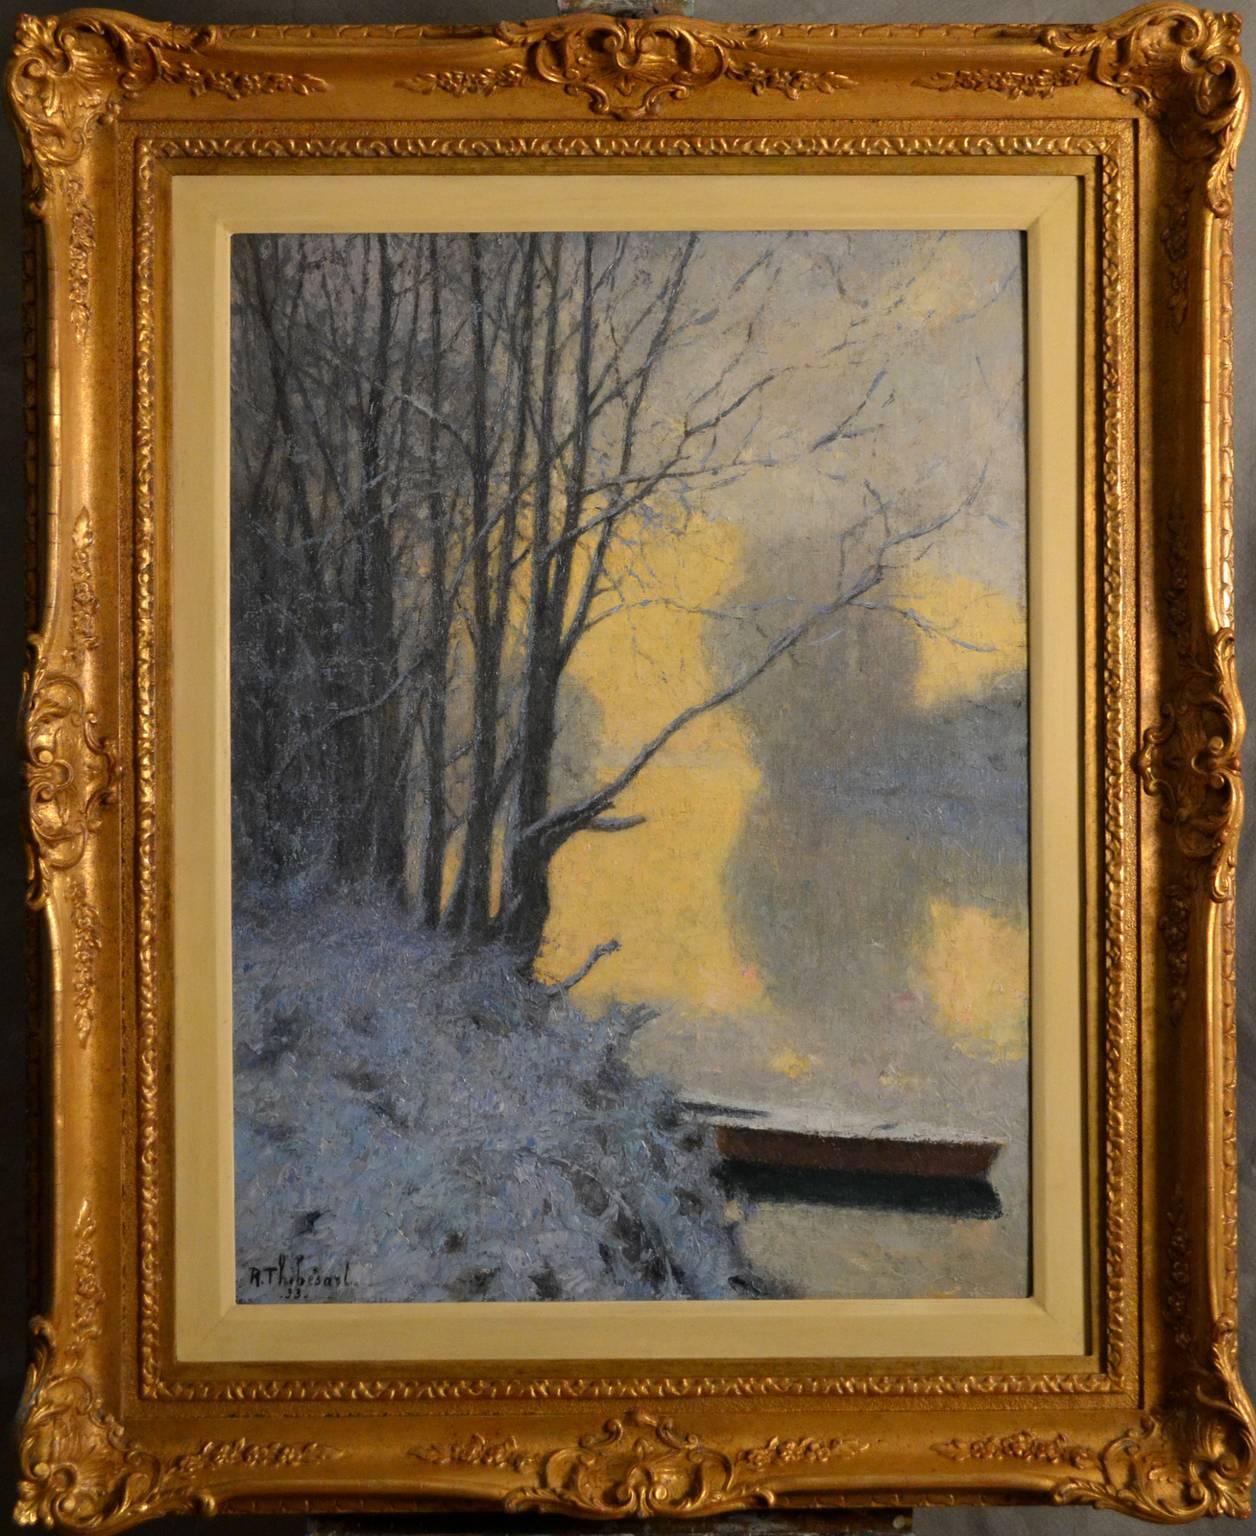 Snowy Riverbank in the Morning - Painting by Raymond Thibesart